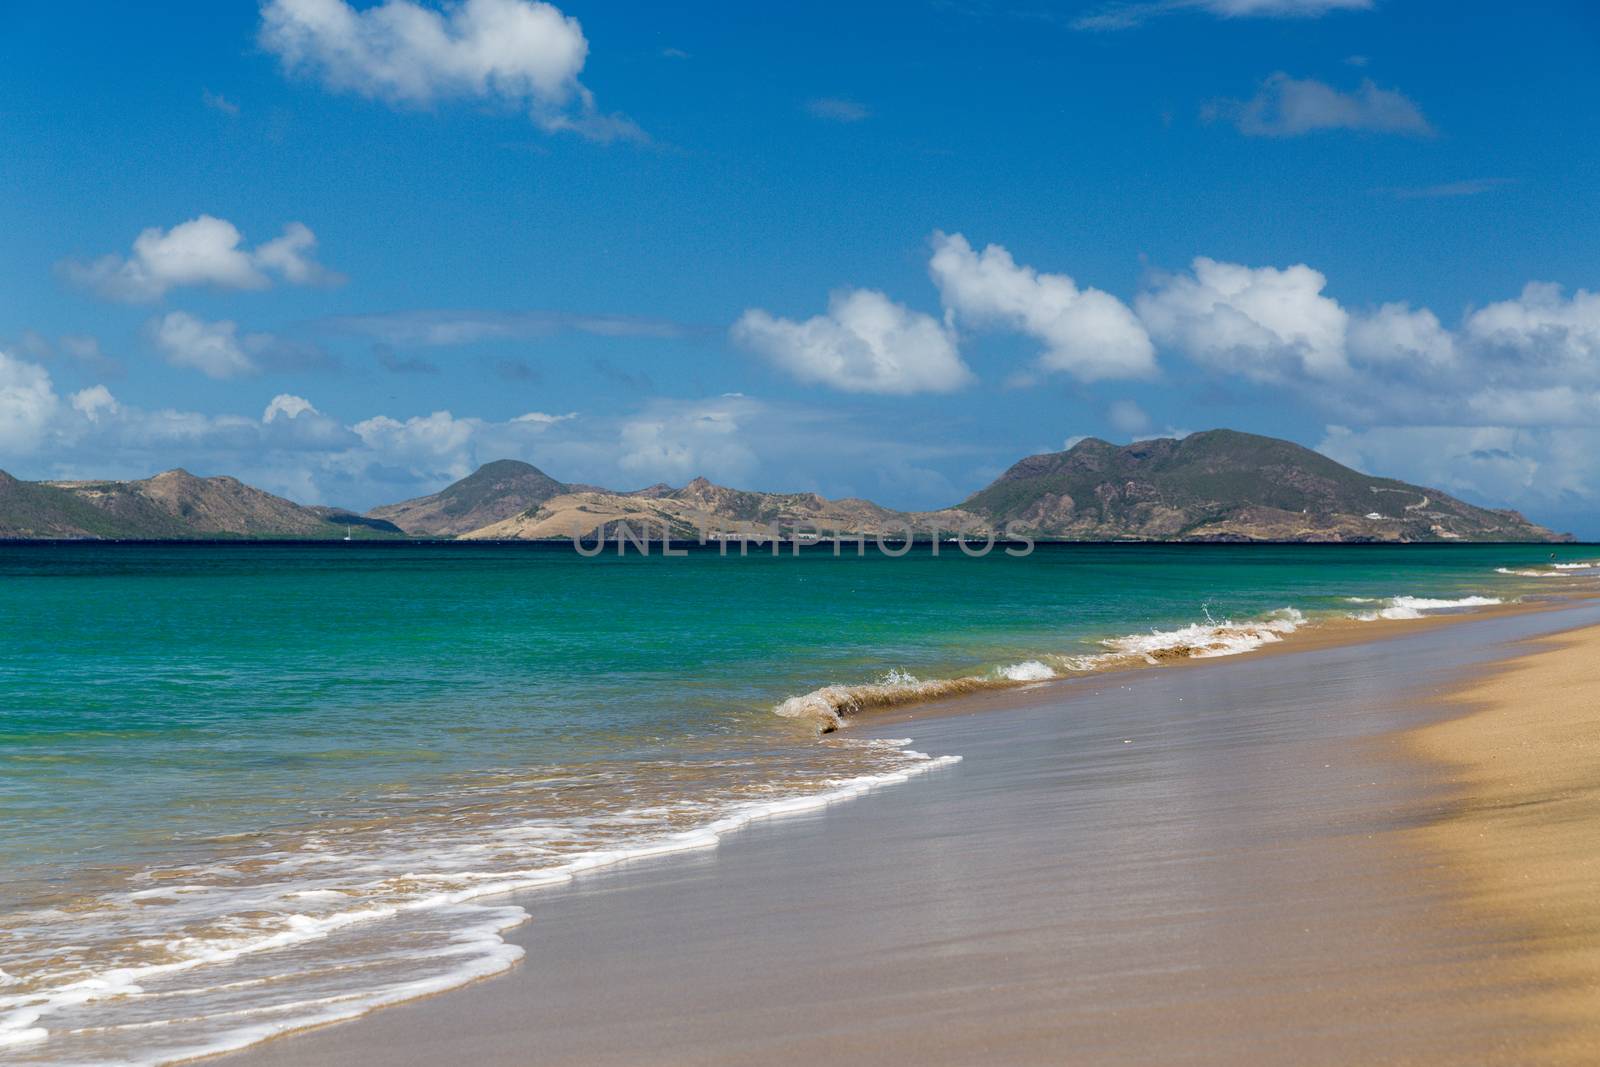 Beach in St Nevis looking towards St Kitts by chrisukphoto